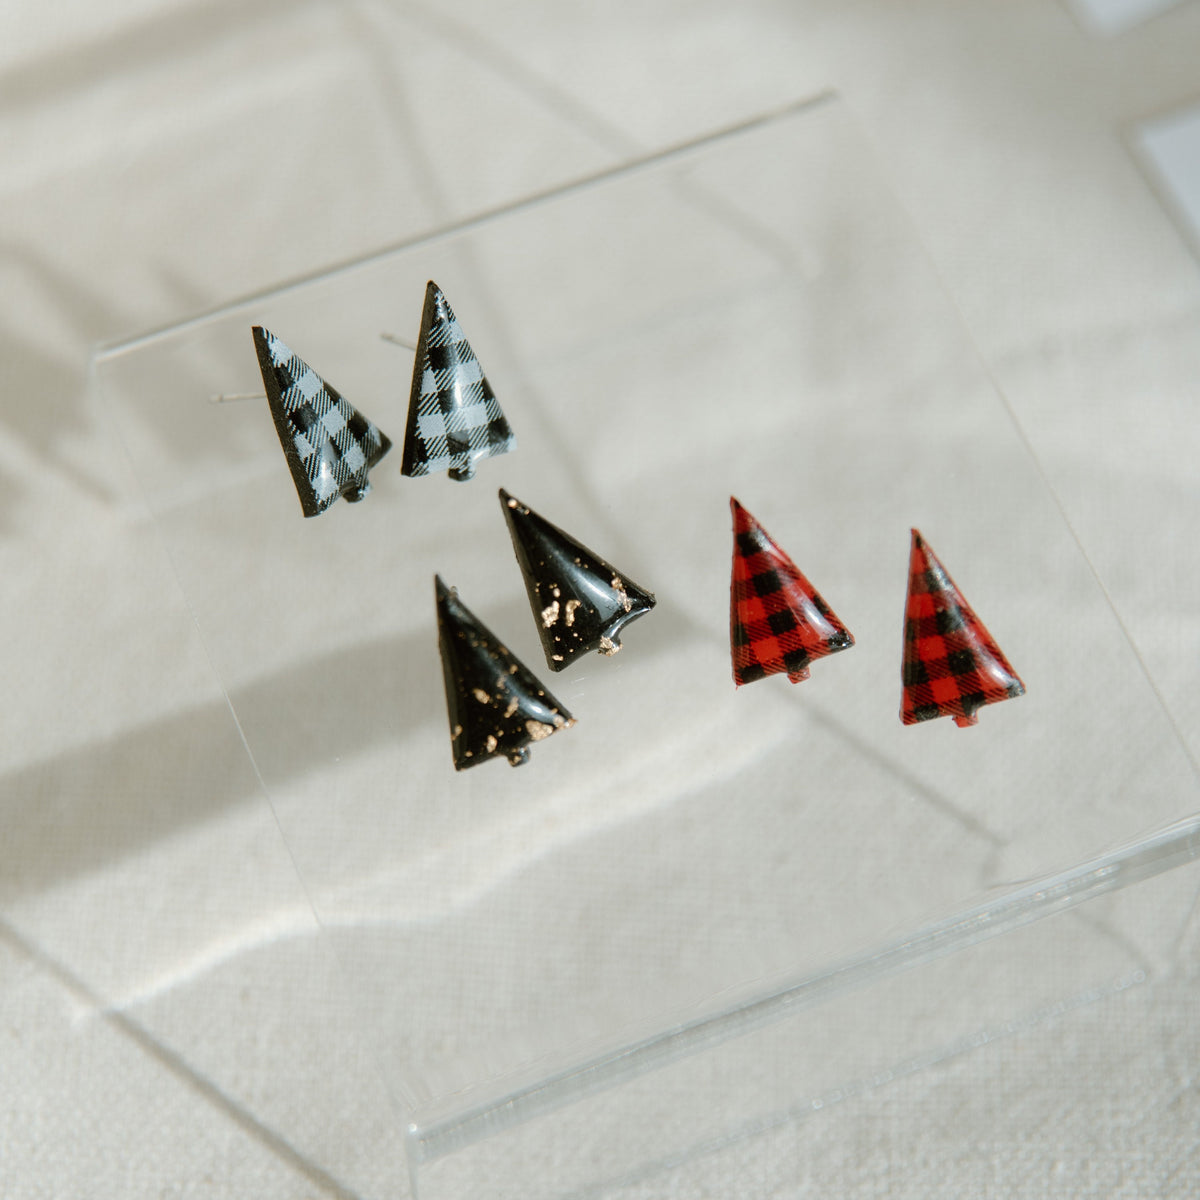 Holiday Tree Studs | Polymer Clay Earrings